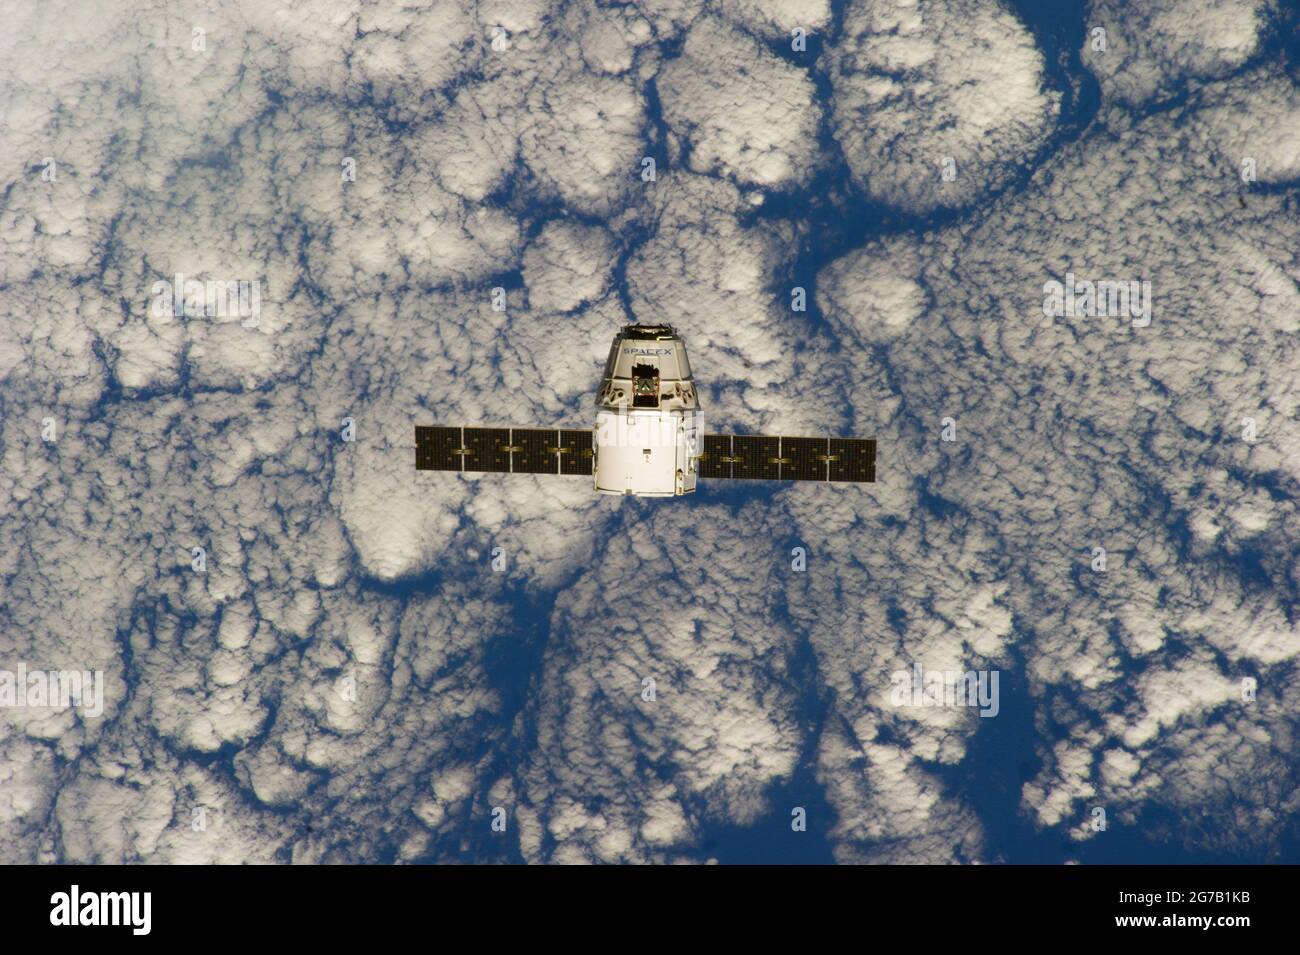 SpaceX CRS-3 Dragon as it approaches the International Space Station (ISS).  Photographed by the Expedition 39 crew members onboard the orbital outpost. The spacecraft was captured by the space station and successfully berthed, following the 30 April 2014 arrival.  An optimised and enhanced version of an NASA image / credit NASA Stock Photo